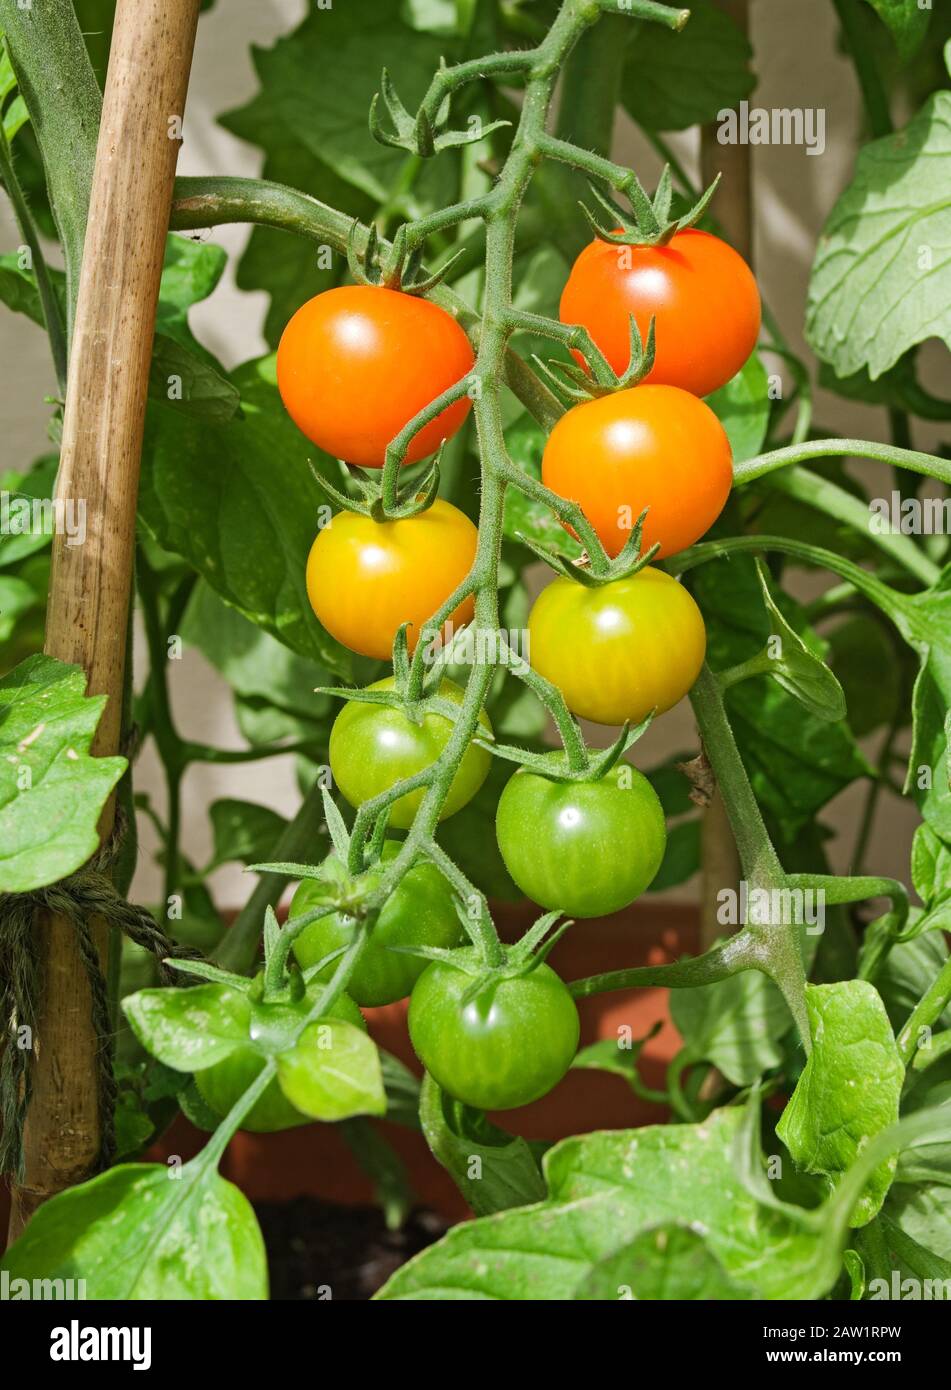 Truss of Sungold tomatoes ripening on the vine in summer sunshine in English domestic garden Stock Photo